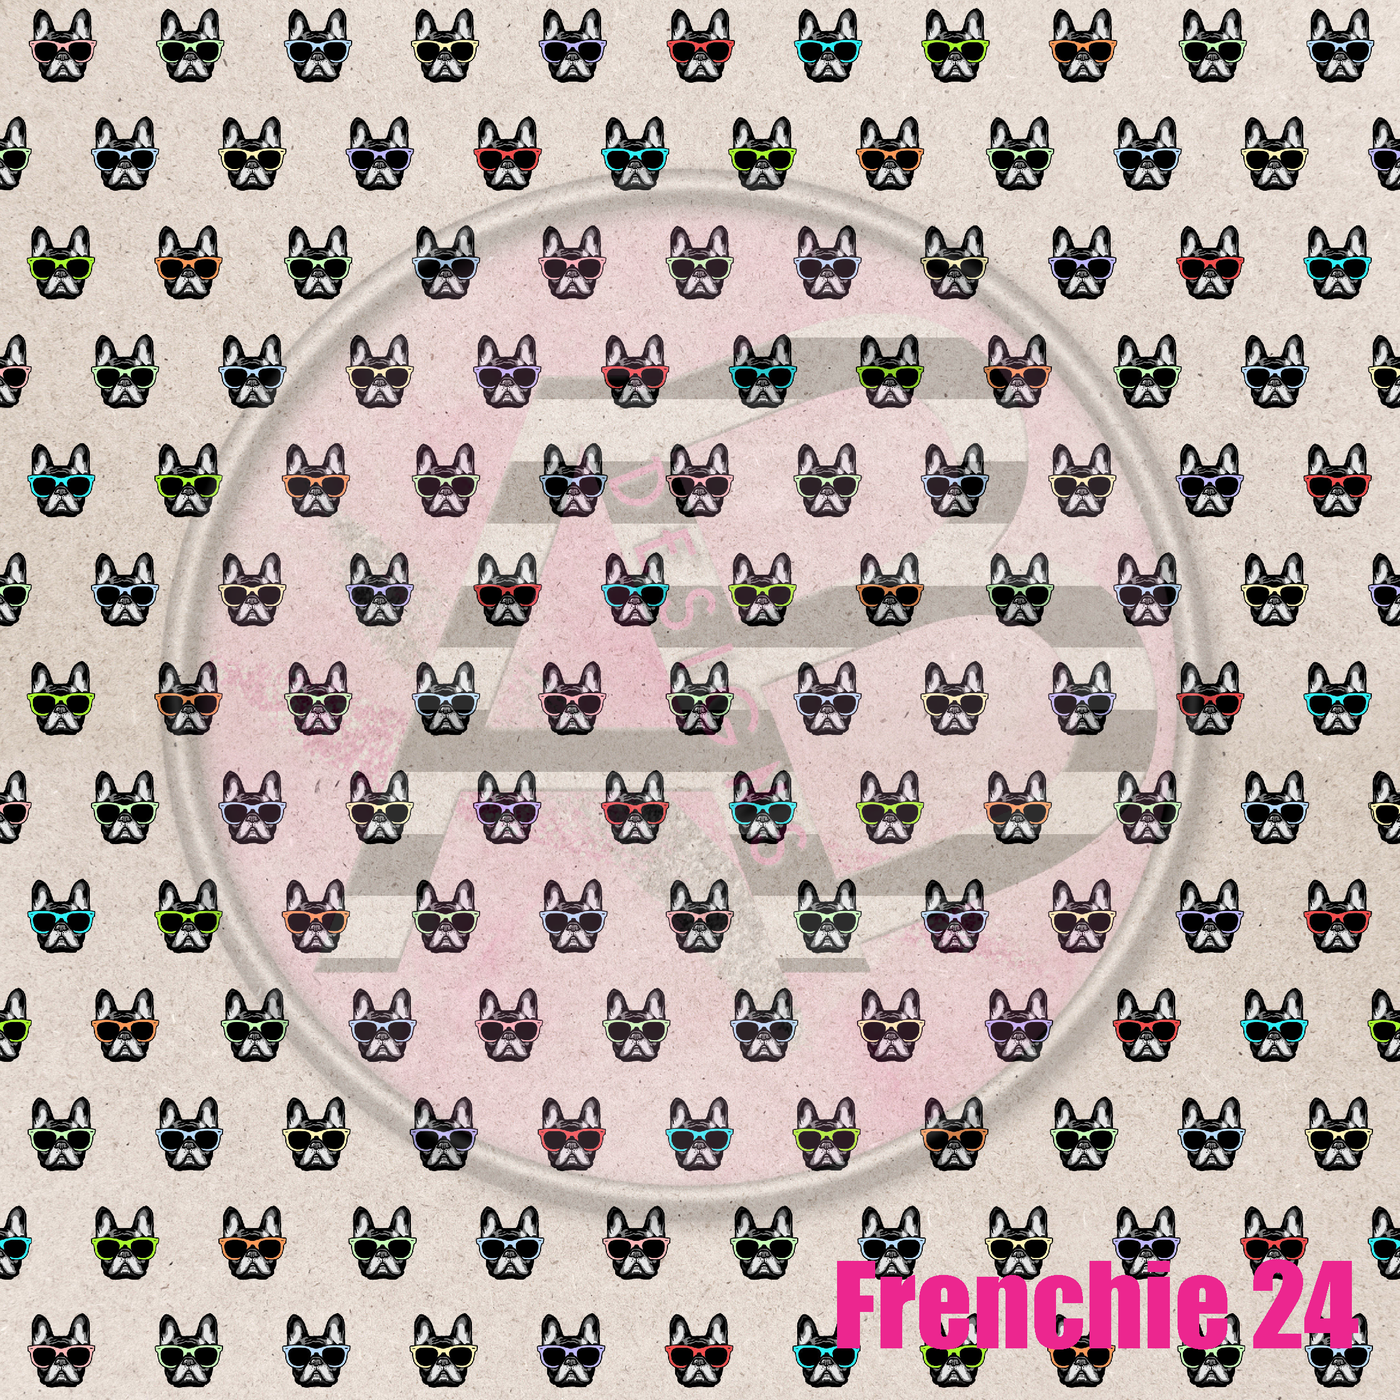 Adhesive Patterned Vinyl - Frenchie 24